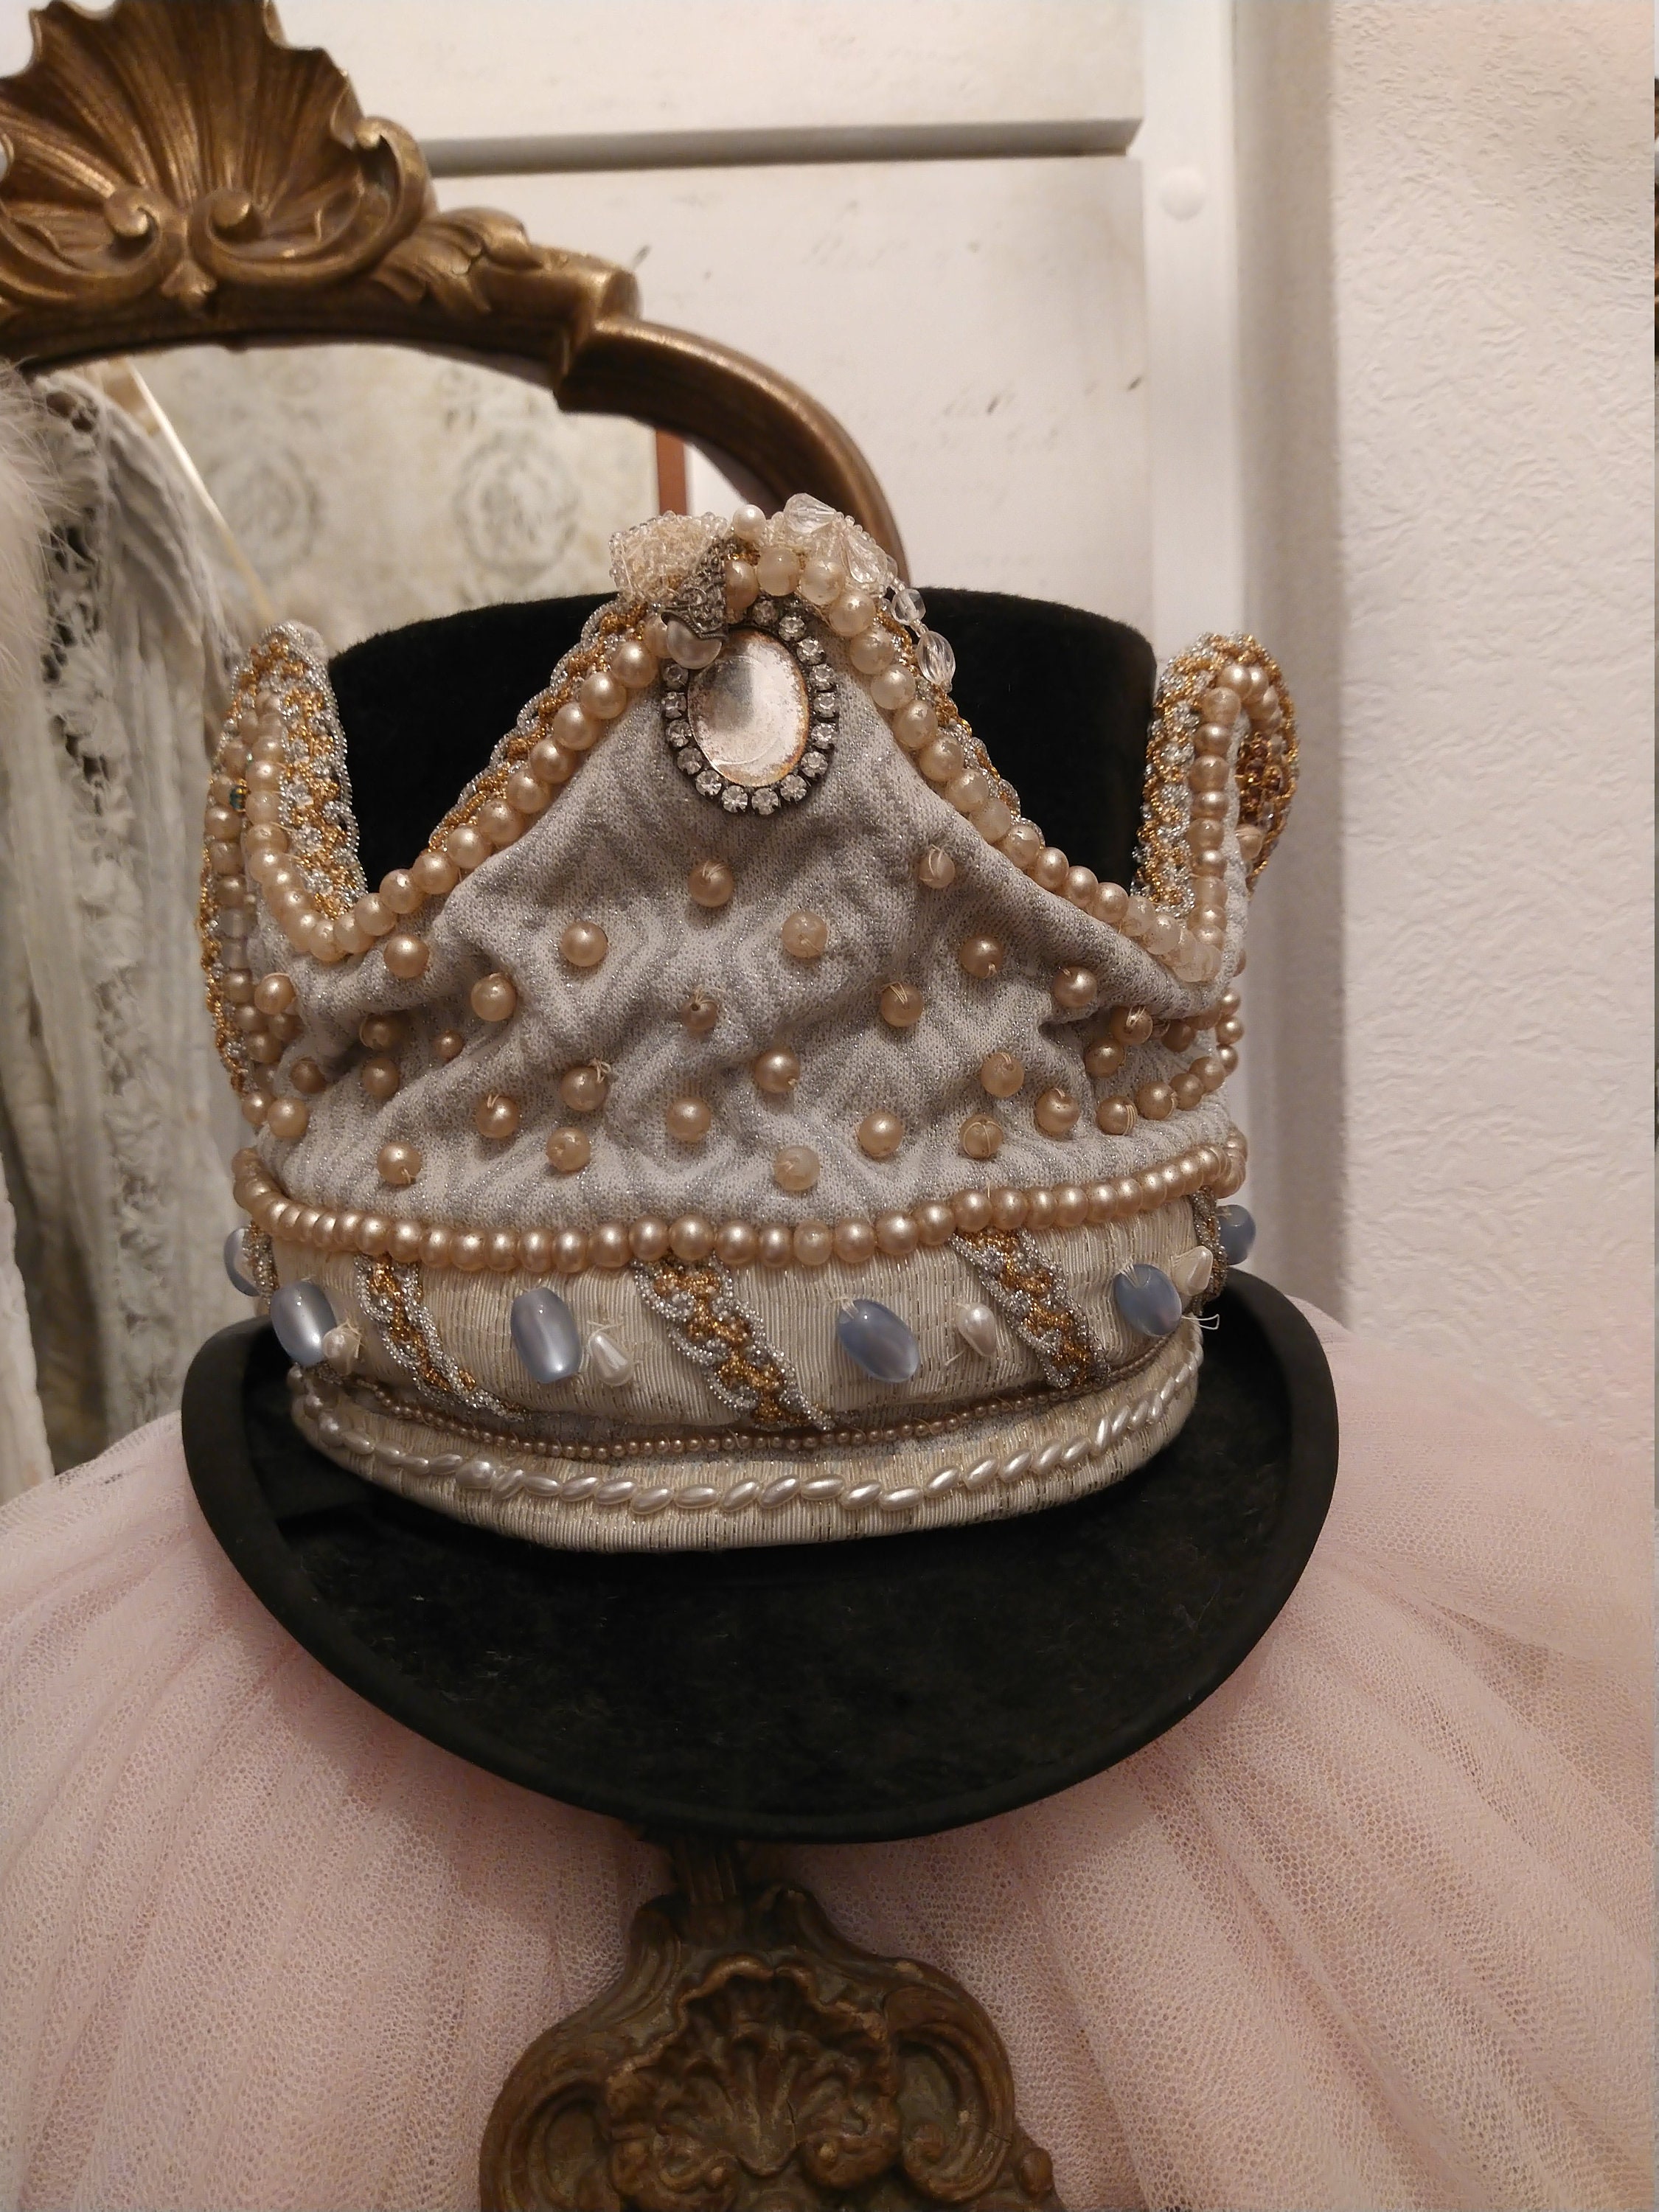 RARE: Antique Procession Fabric Crown From France With Stones and Pearls  Around 1900 Theater Costume Madonna Blue Gold -  Denmark